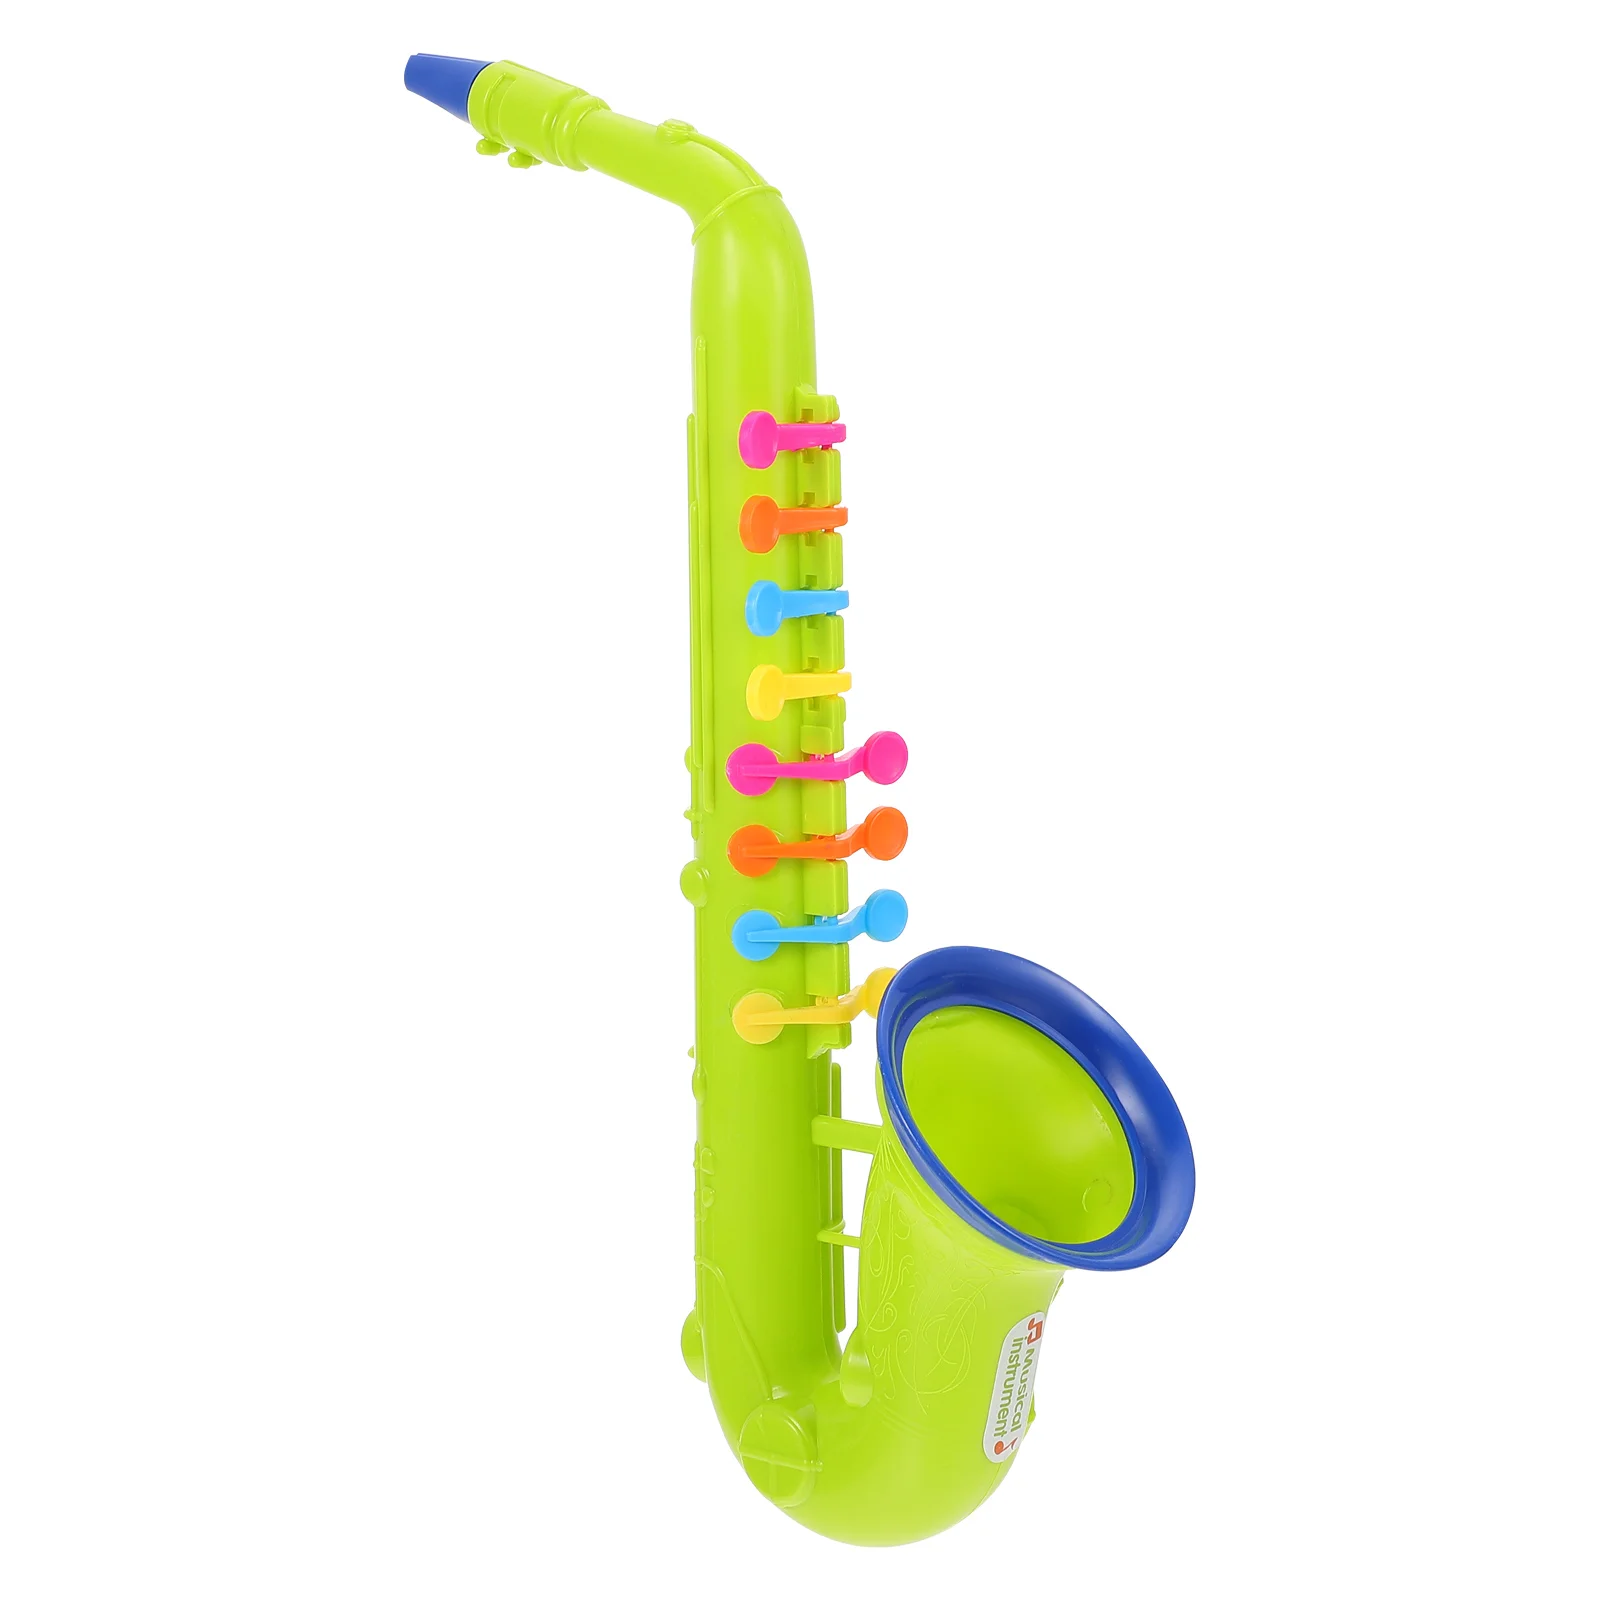 

Simulated Musical Toy Educational Kids Toy Plaything Mini Realistic Abs Practical Model